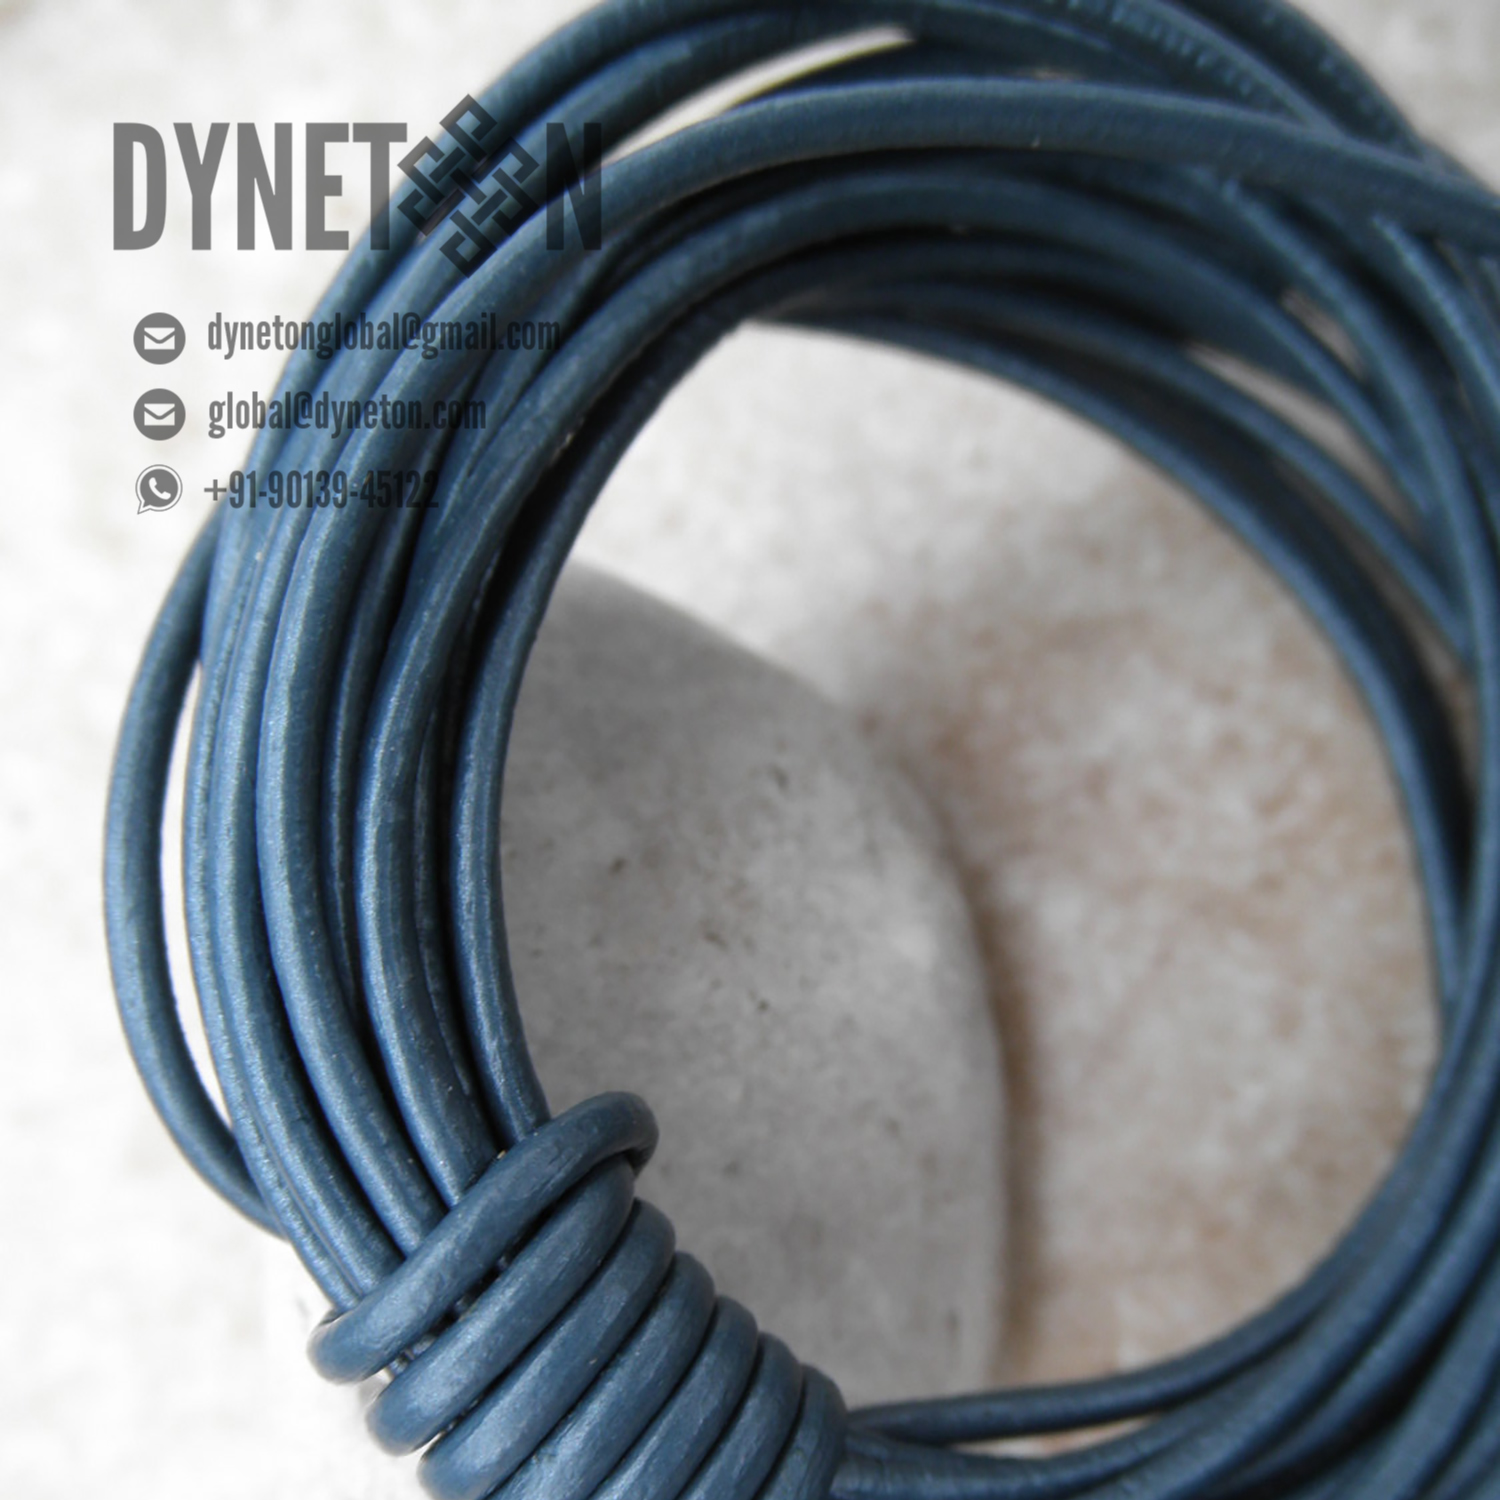 5mm Round Leather Cord - DYNETON / Round Leather Cords 5 mm